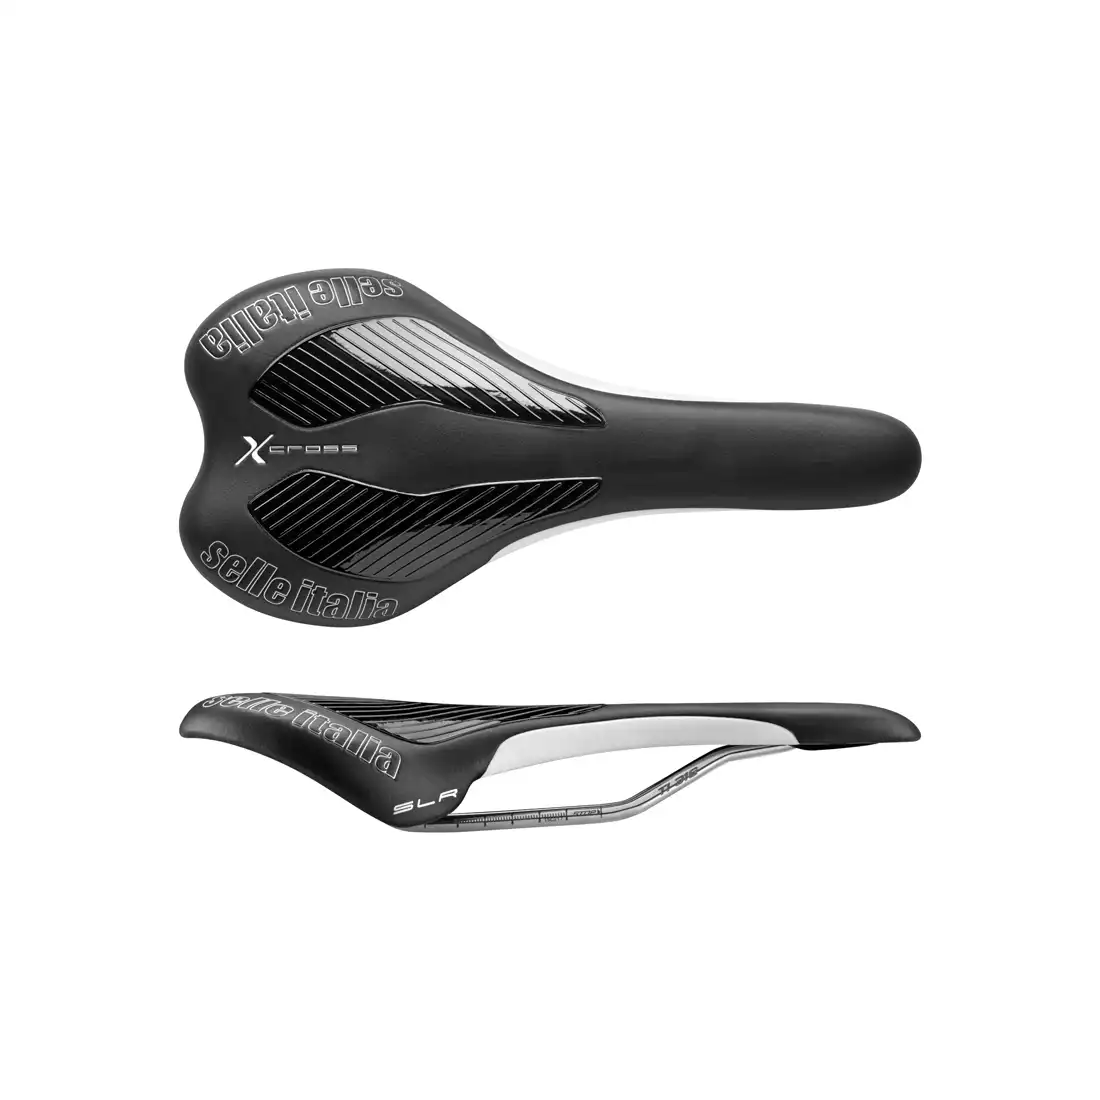 SELLE ITALIA bicycle saddle slr-x cross s (id match-S1) black SIT-041A102IKA003 MikeSPORT